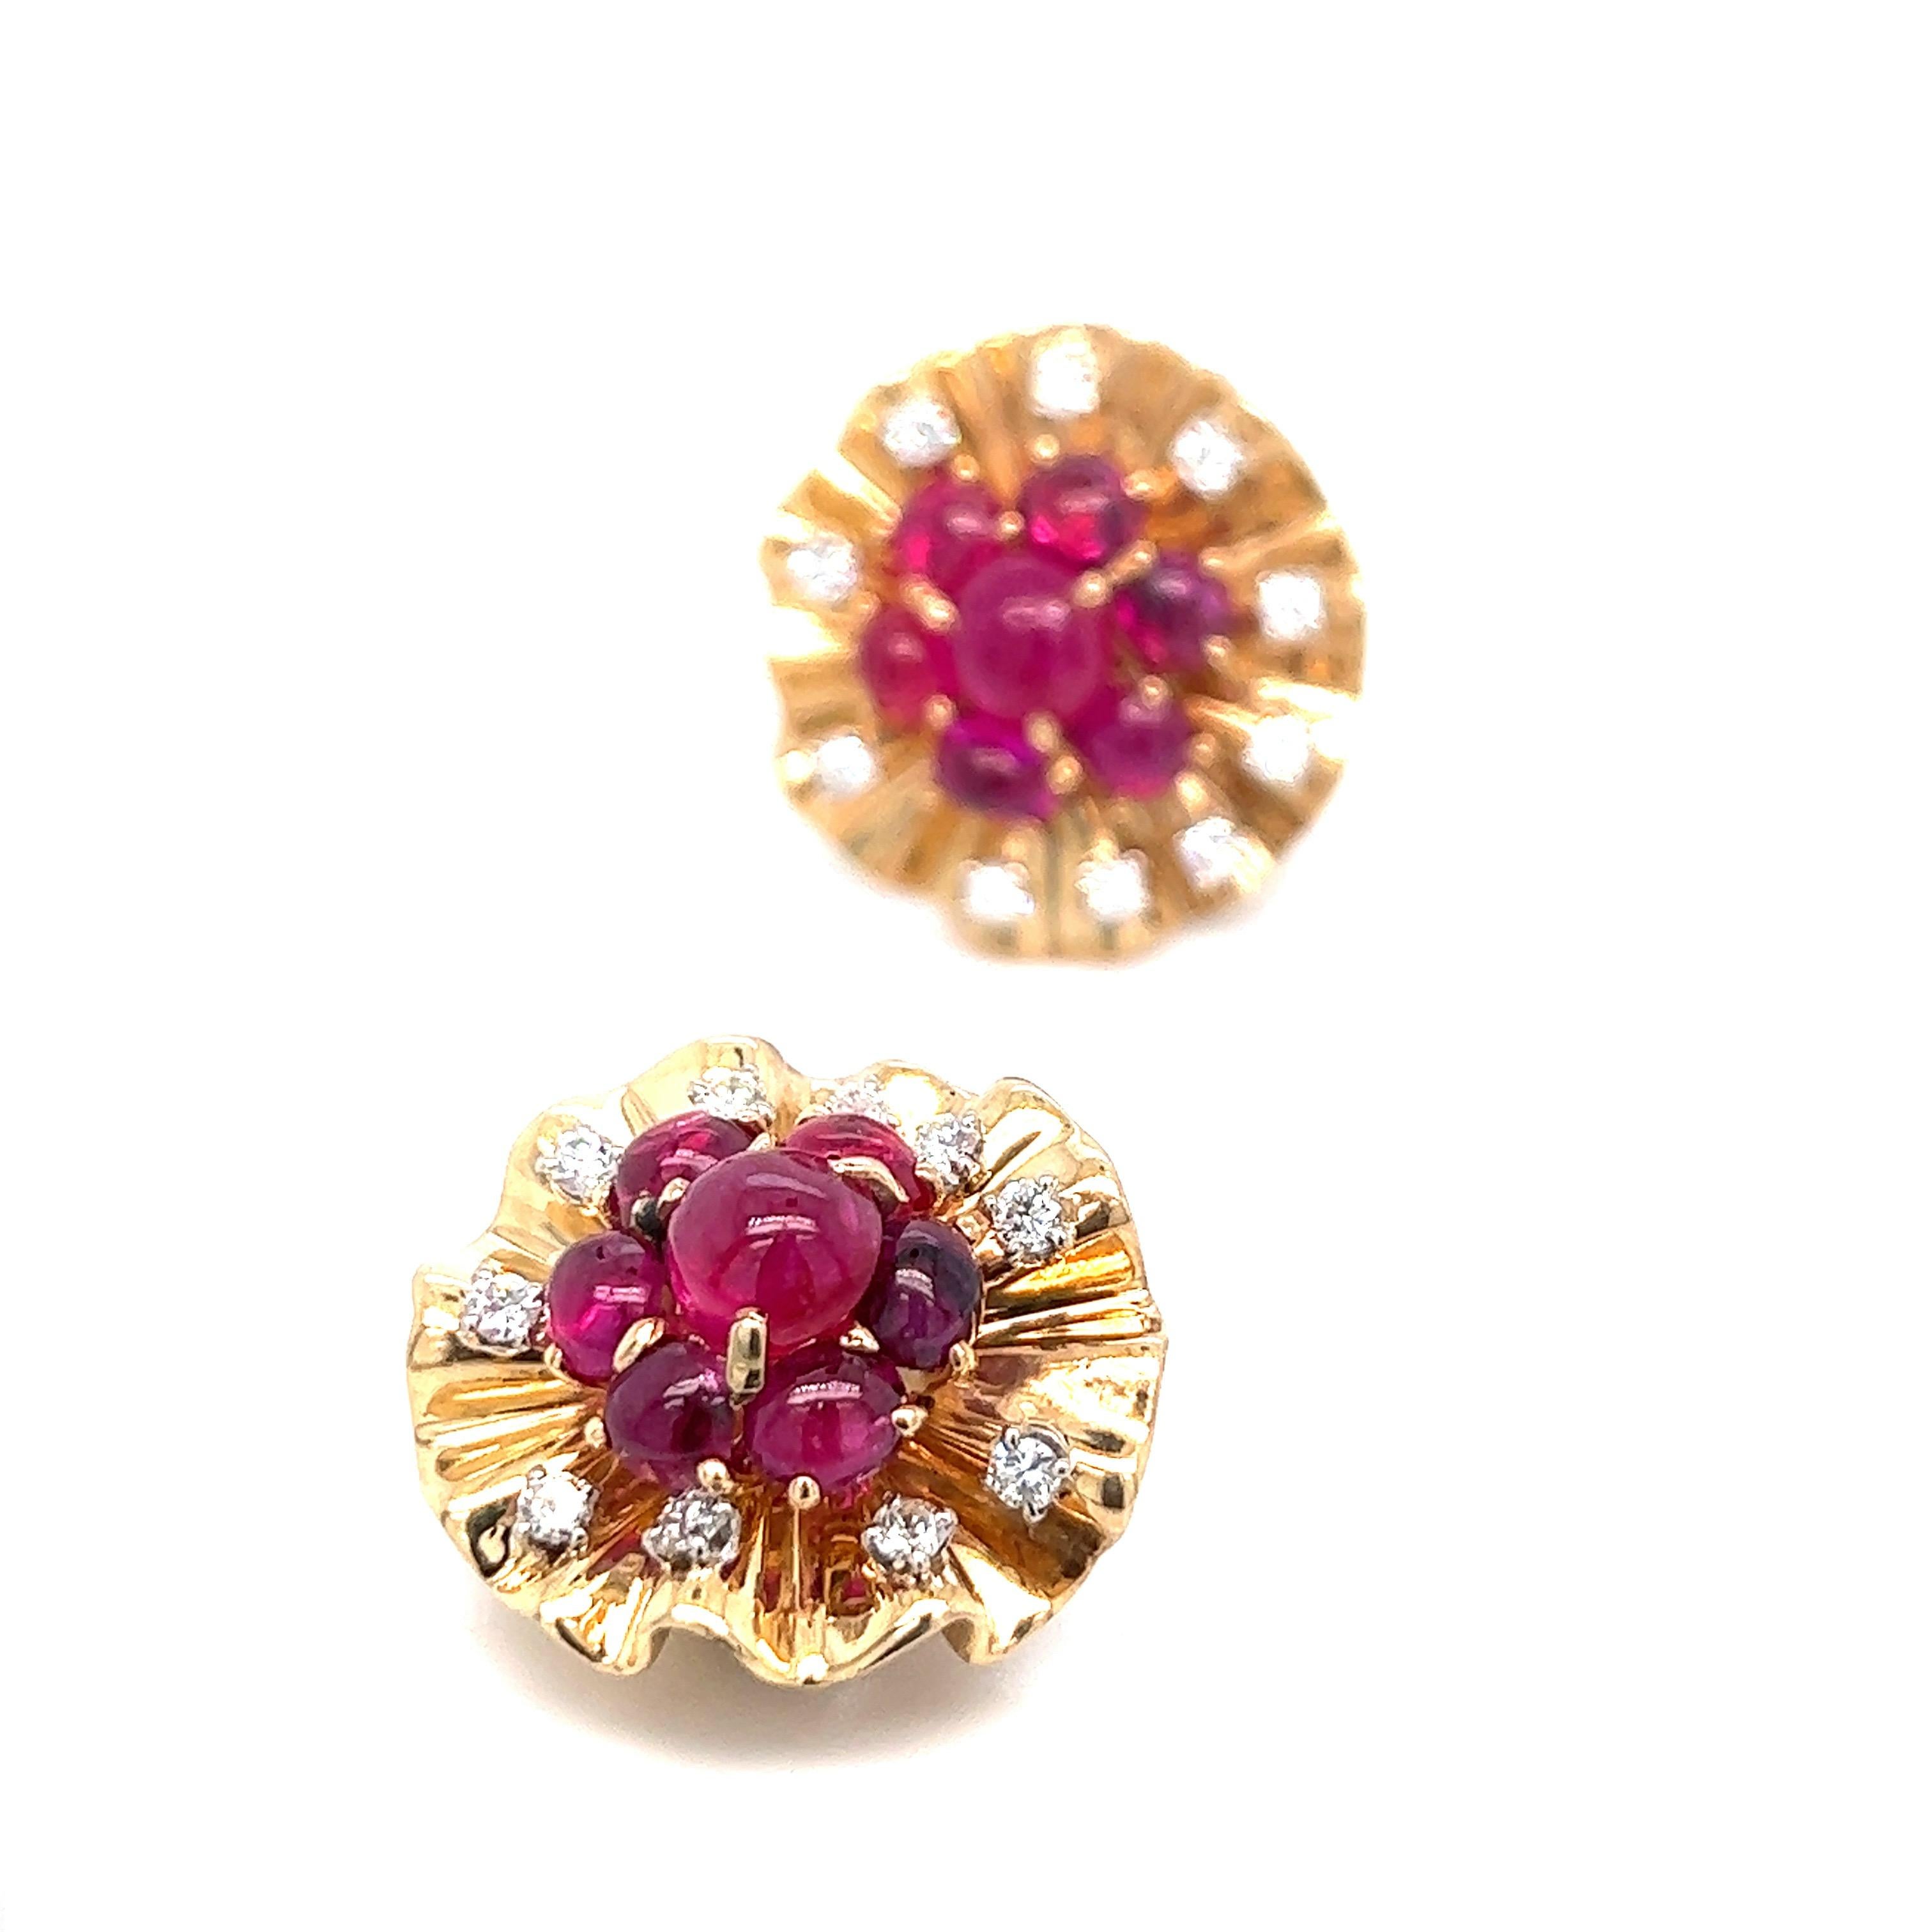 Trabert & Hoeffer Mauboussin Ruby Diamond Gold Ear Clips In Excellent Condition For Sale In New York, NY